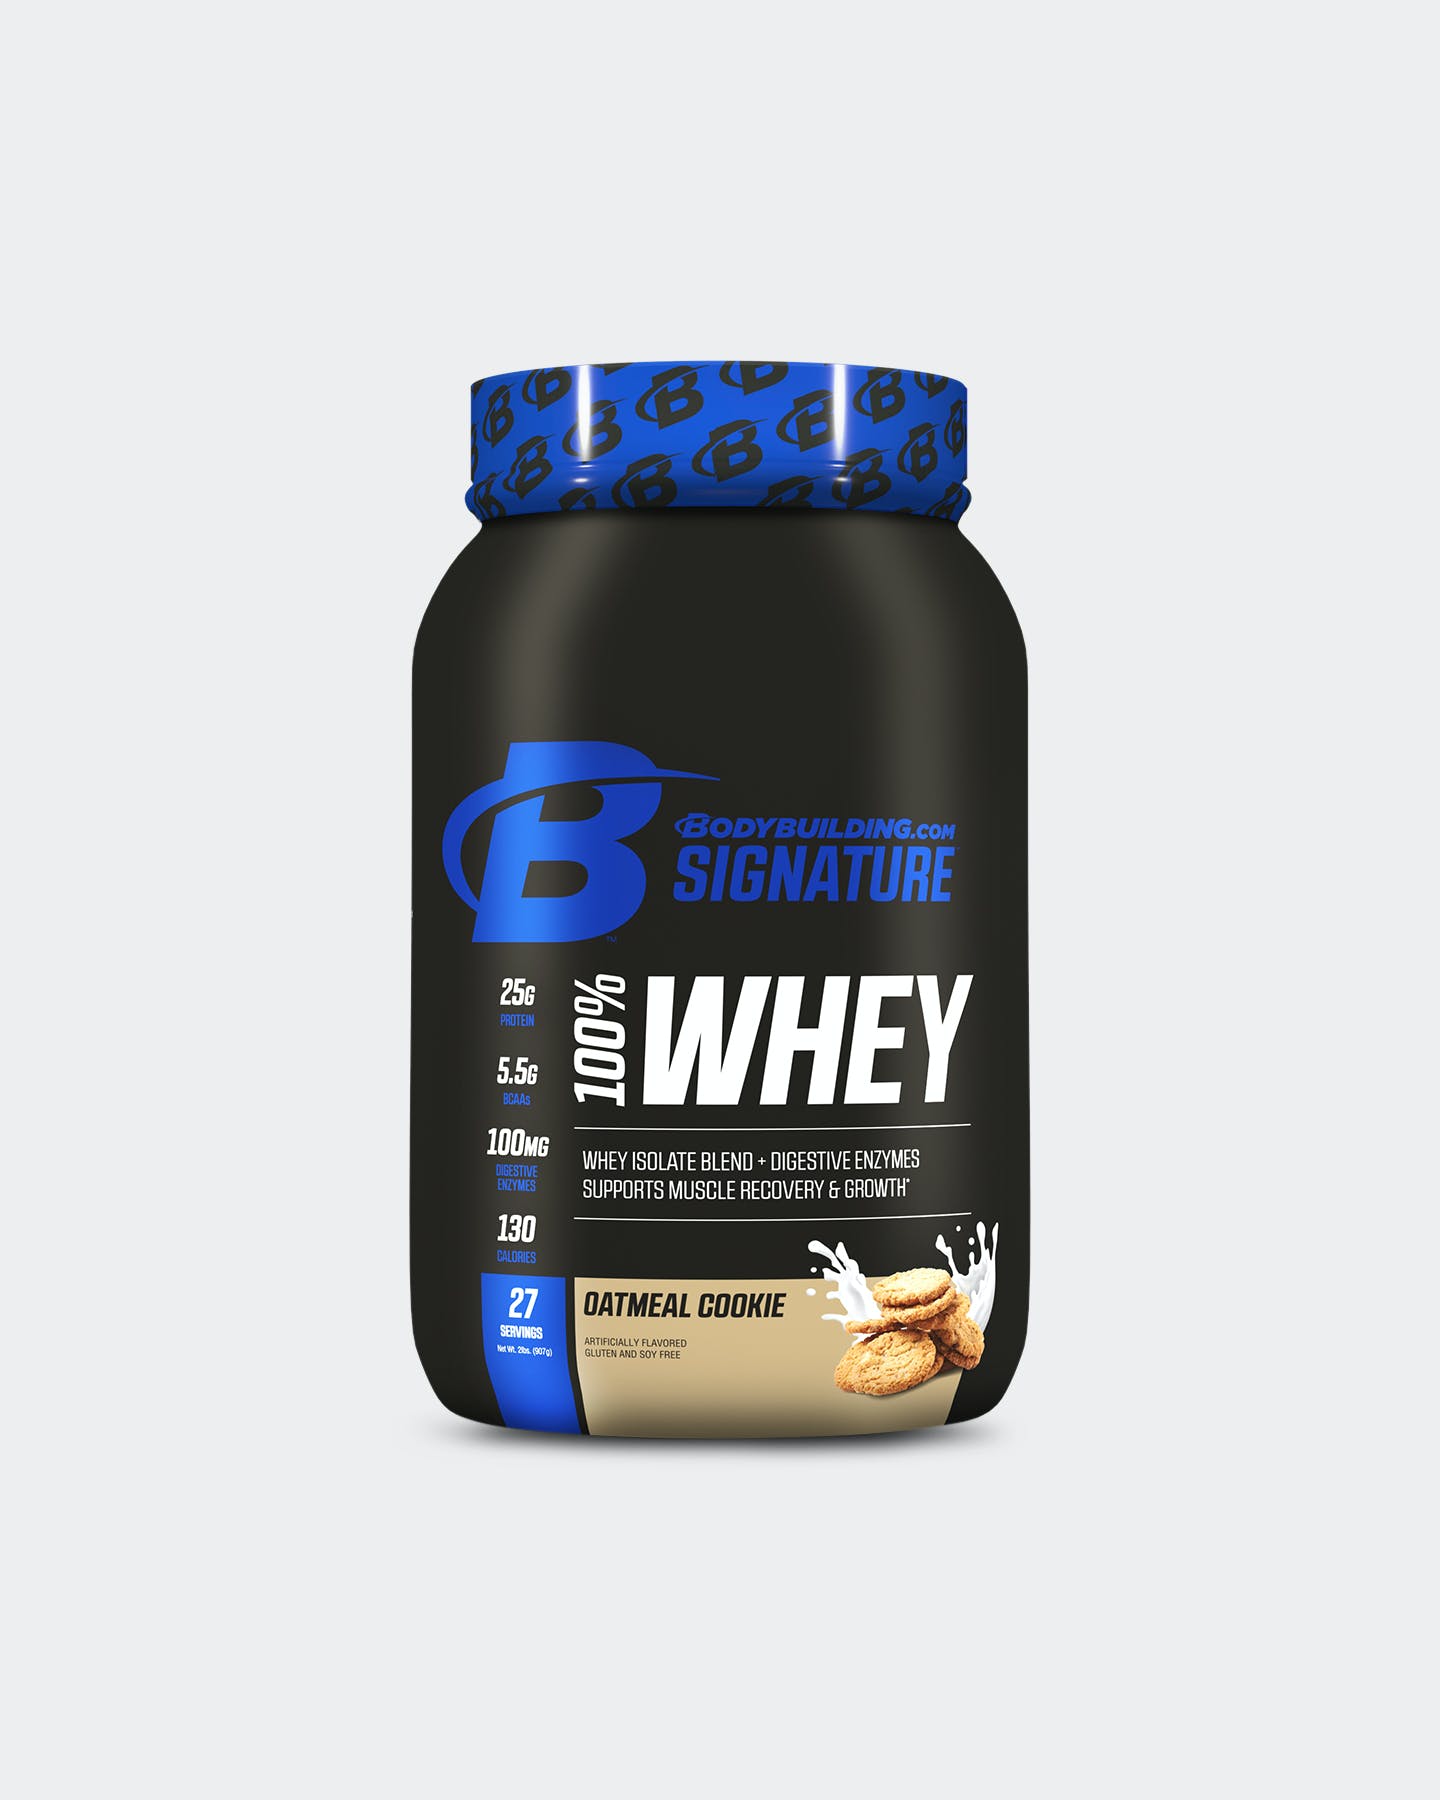 Bodybuilding.com Signature Signature 100% Whey Protein Powder, Oatmeal Cookie, 2 Lbs.